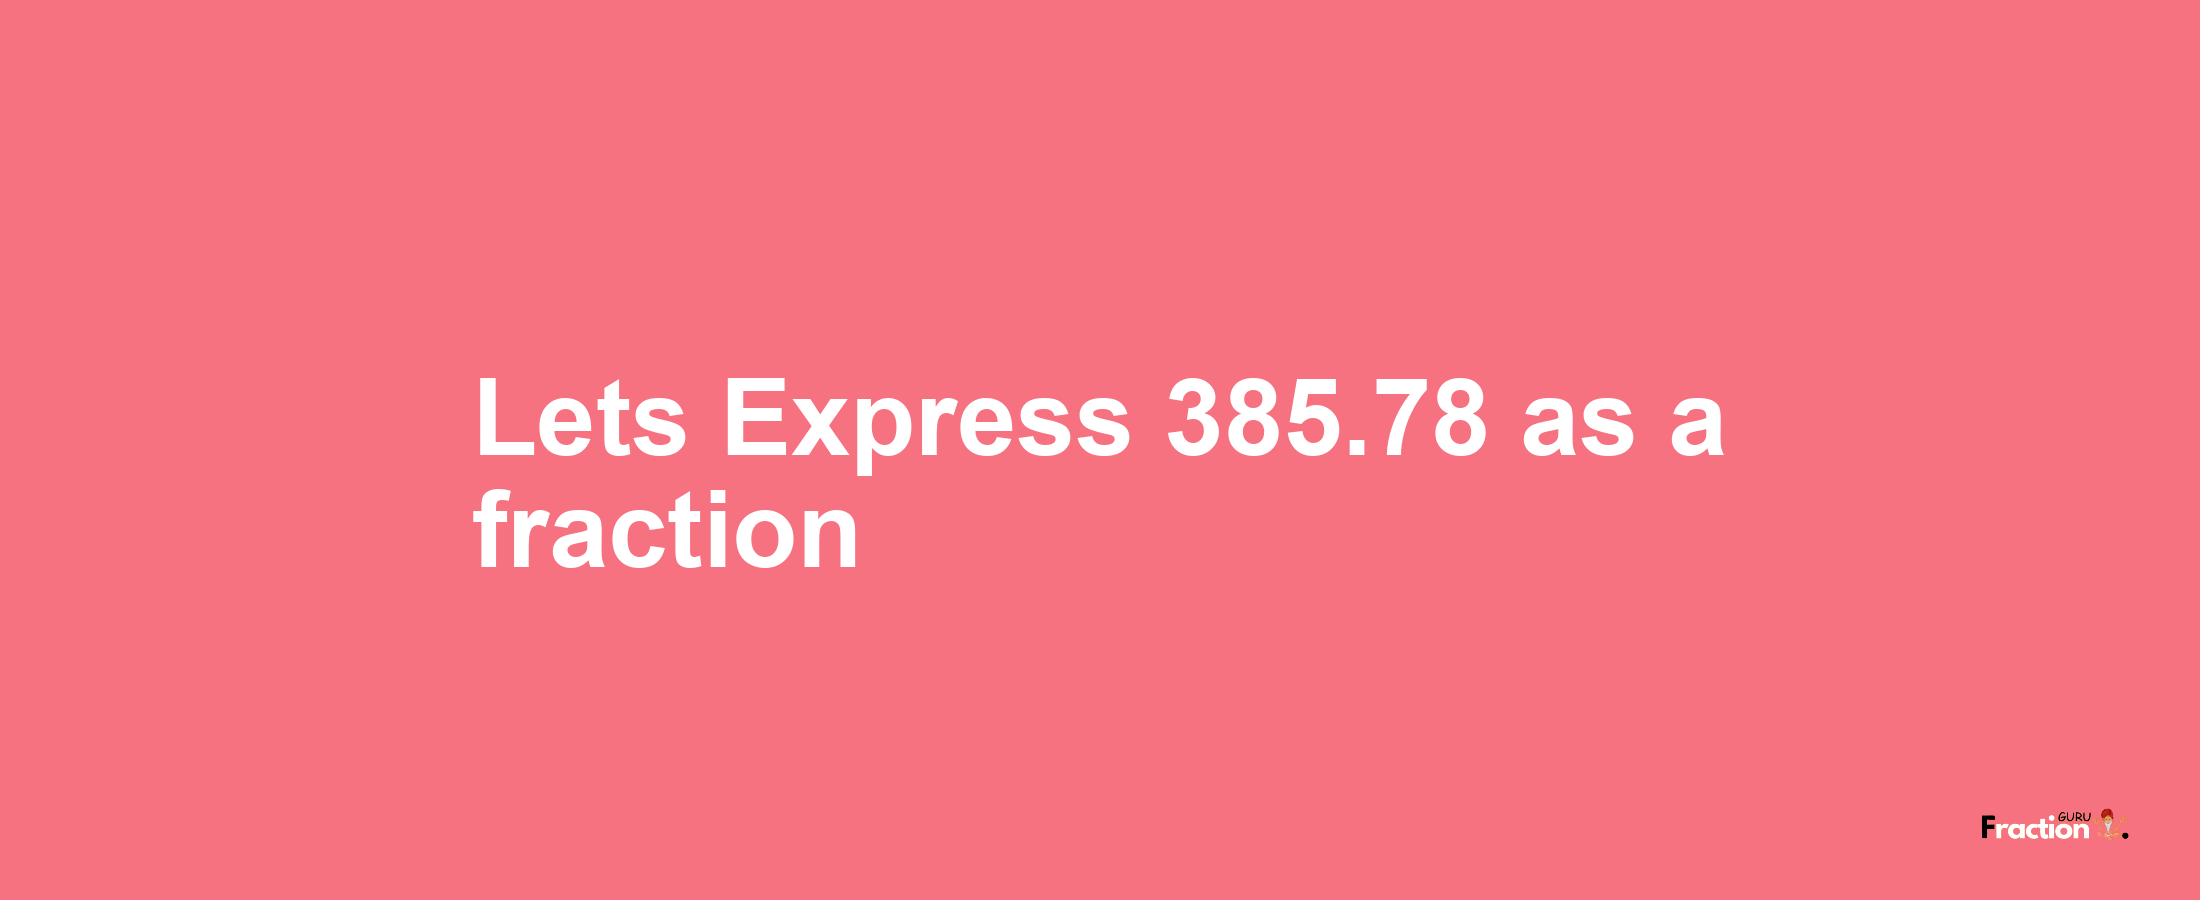 Lets Express 385.78 as afraction